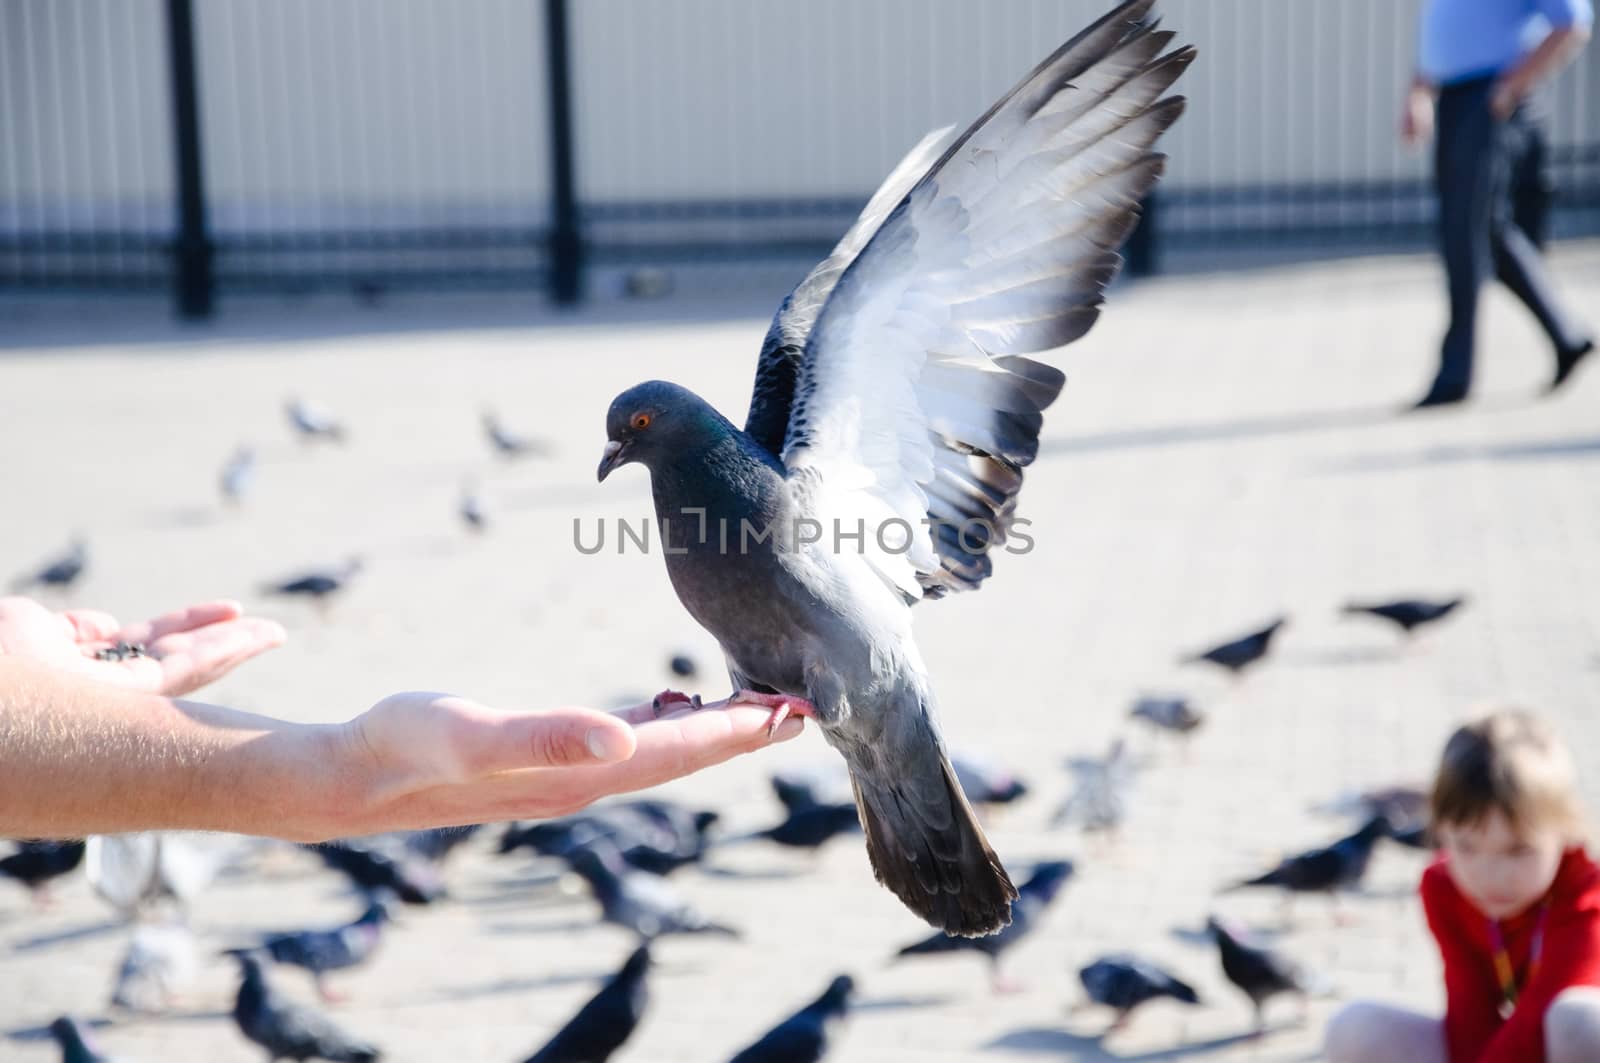 Pigeon sitting on the hand with stretched wings close-up, Sergiev Posad, Moscow region, Russia
